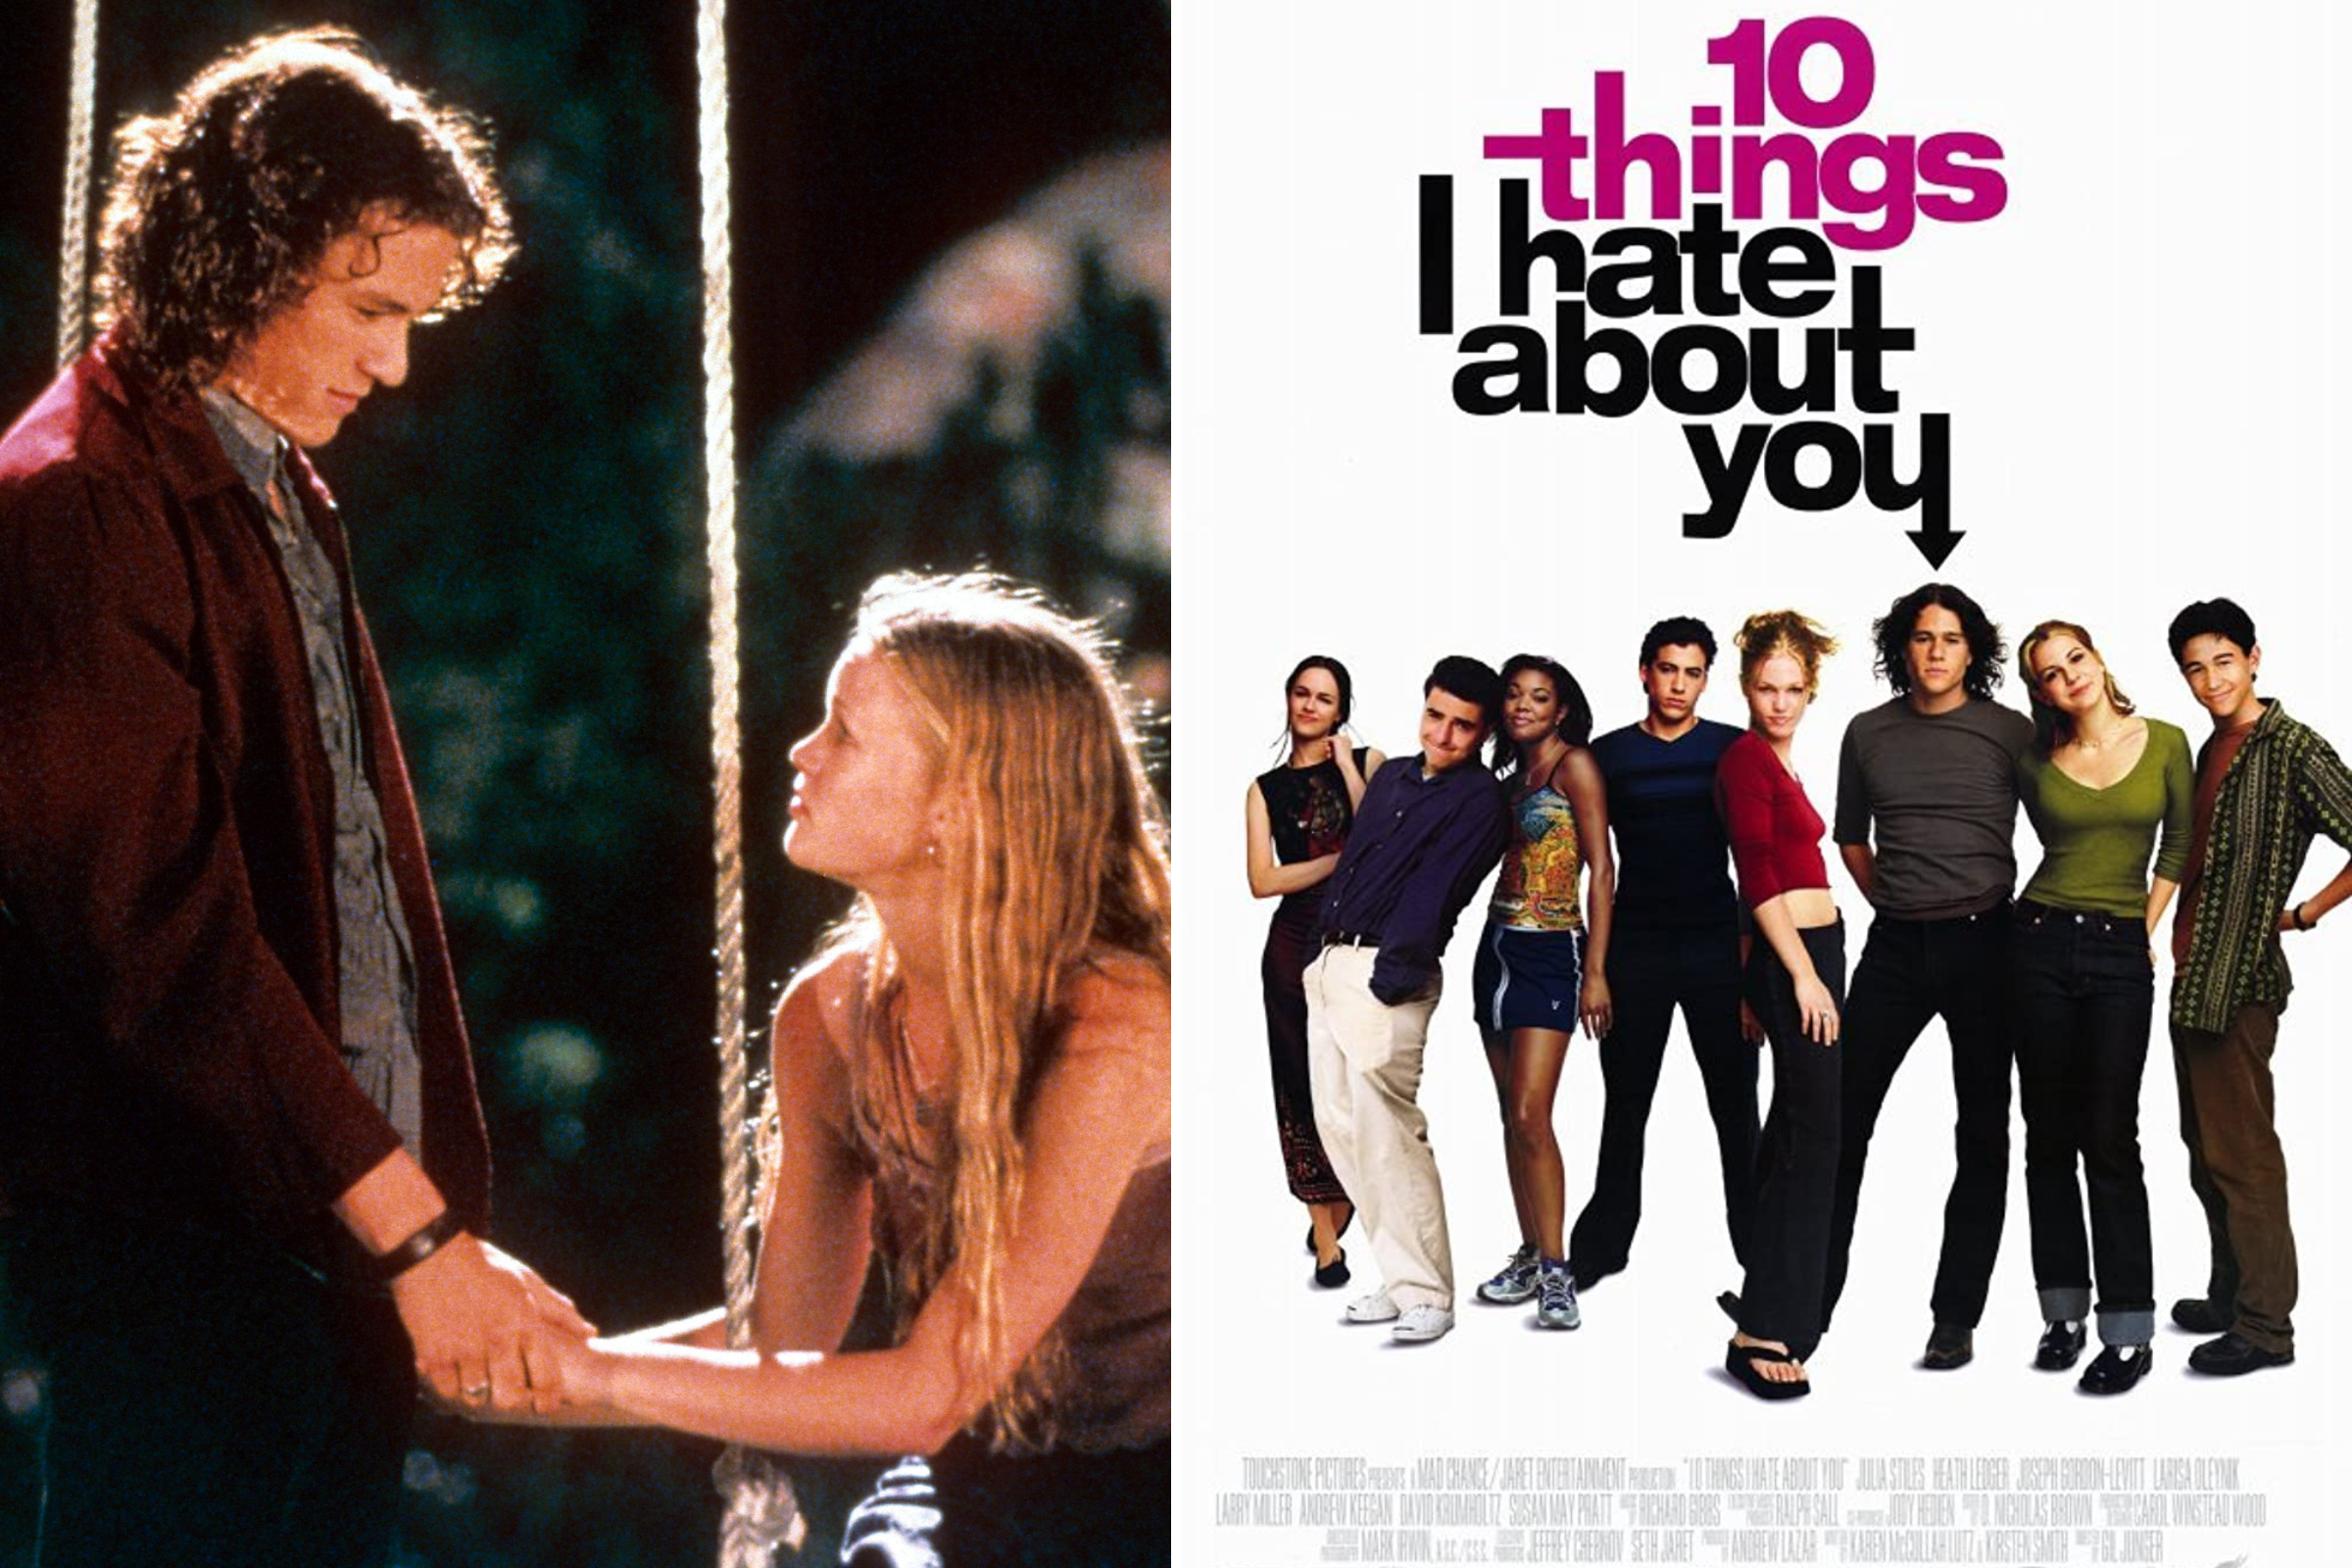 Proposal Inspired by '10 Things I Hate About You' Leaves Internet 'Sobbing